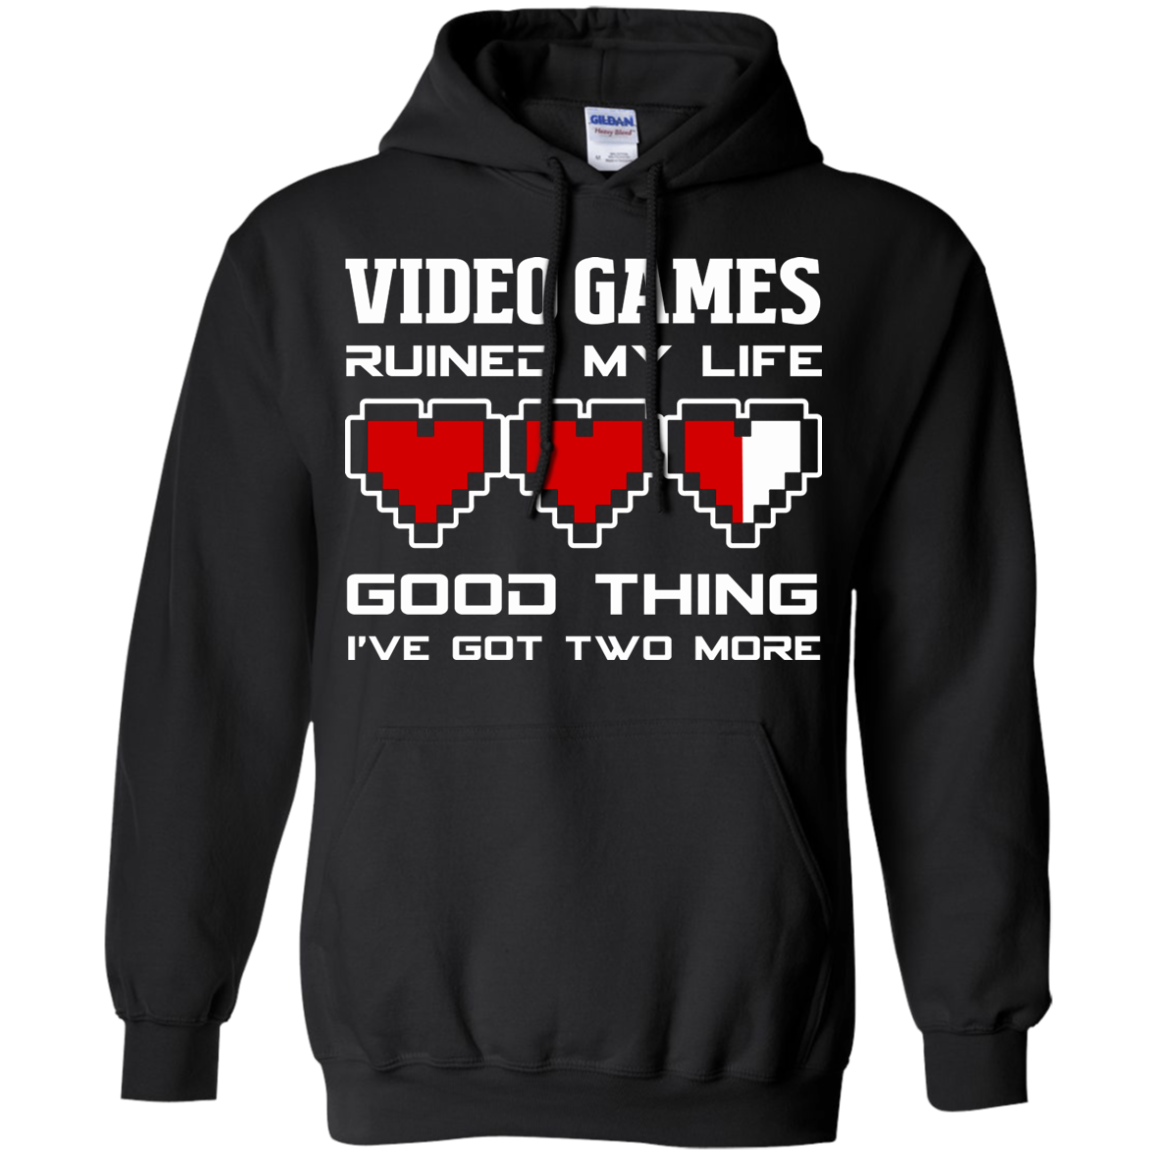 Video Games Ruined My Life - Video Gaming Shirt